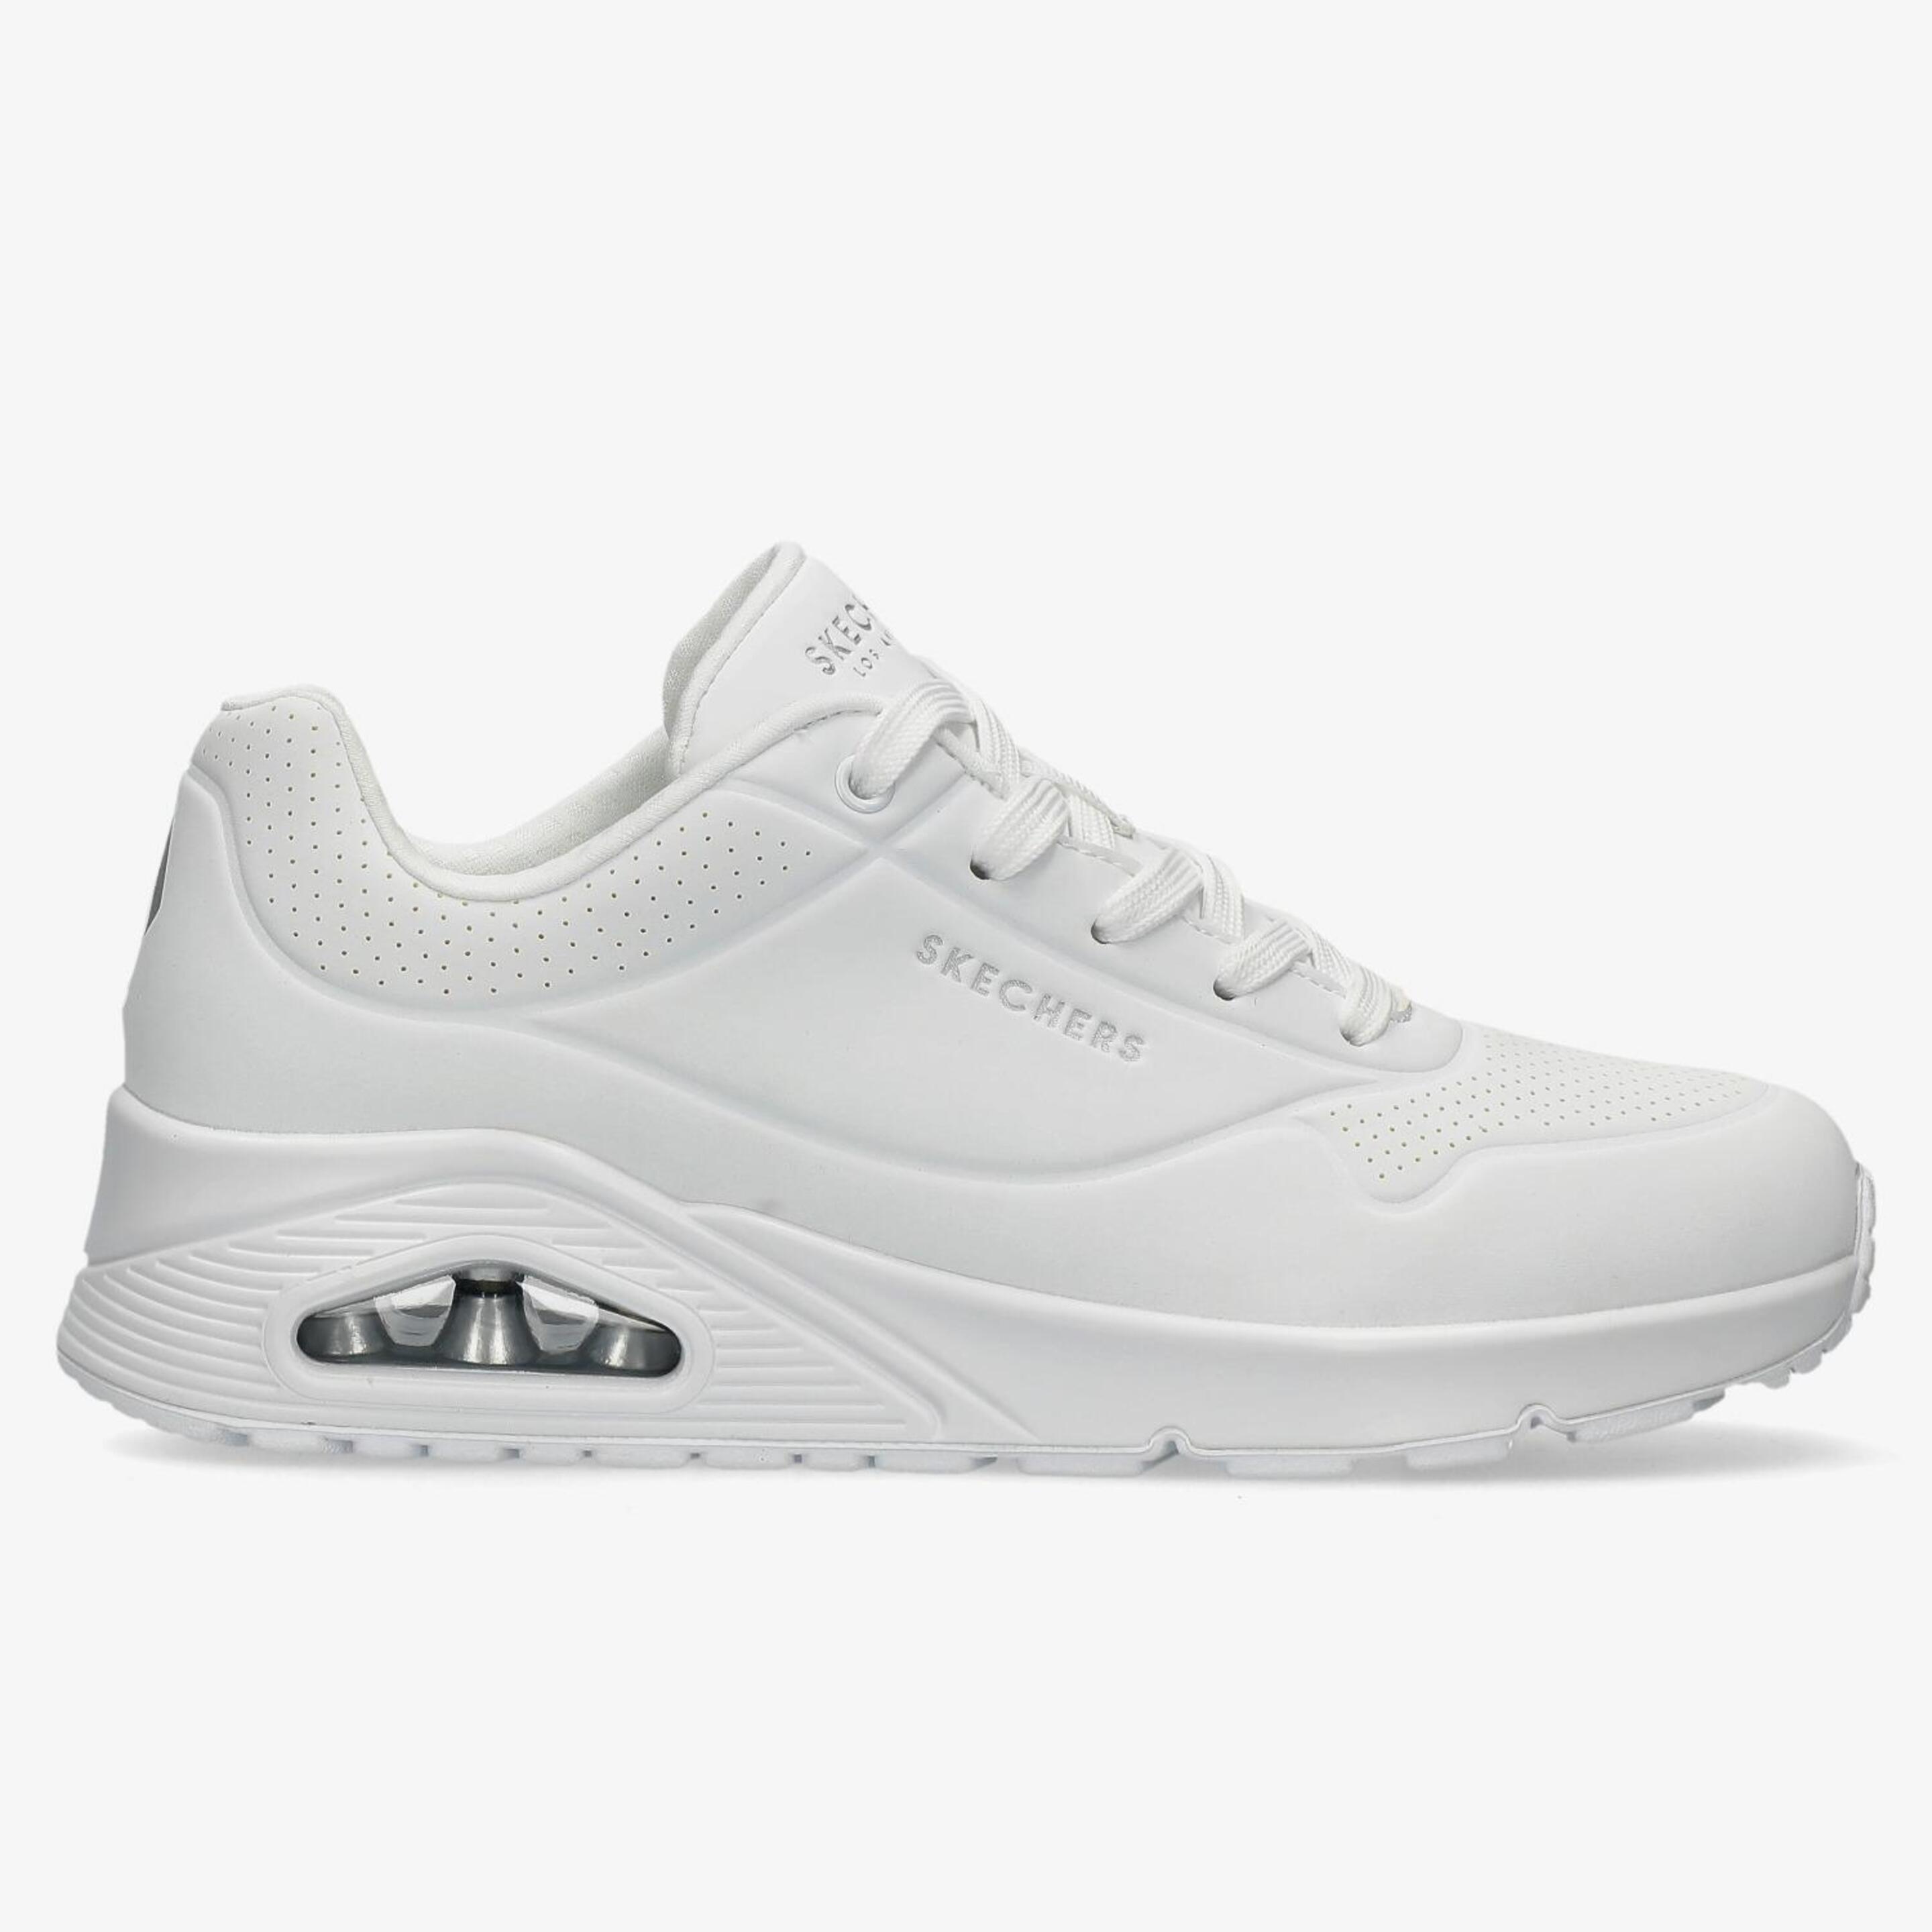 Skechers Uno - blanco - Sapatilhas Mulher